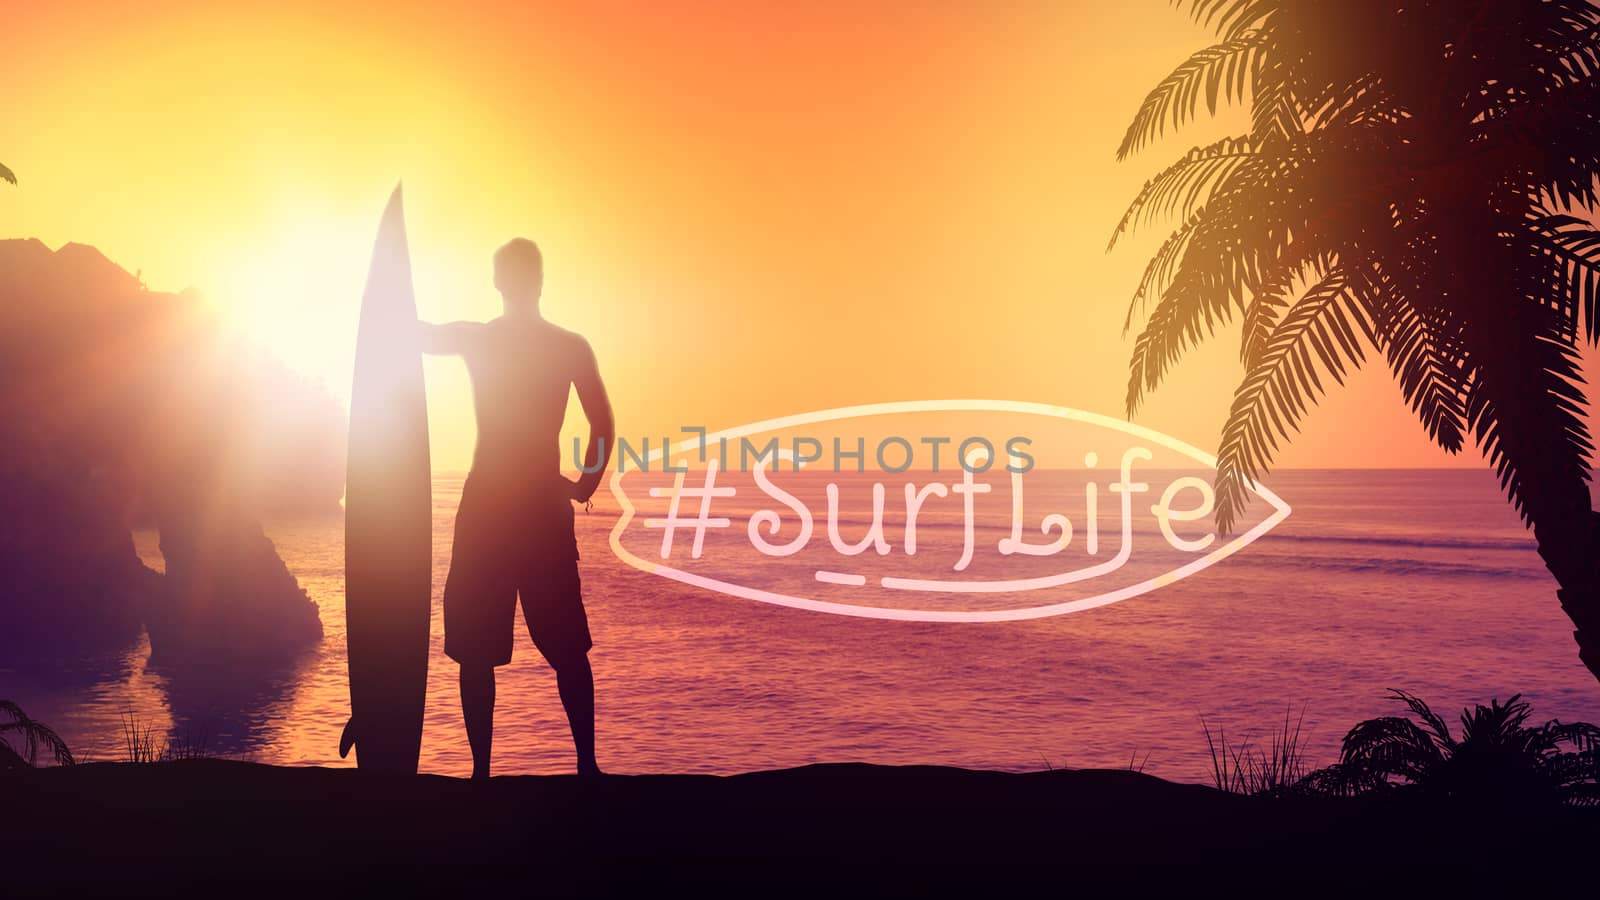 Silhouette of a surfer on a tropical beach. by ConceptCafe